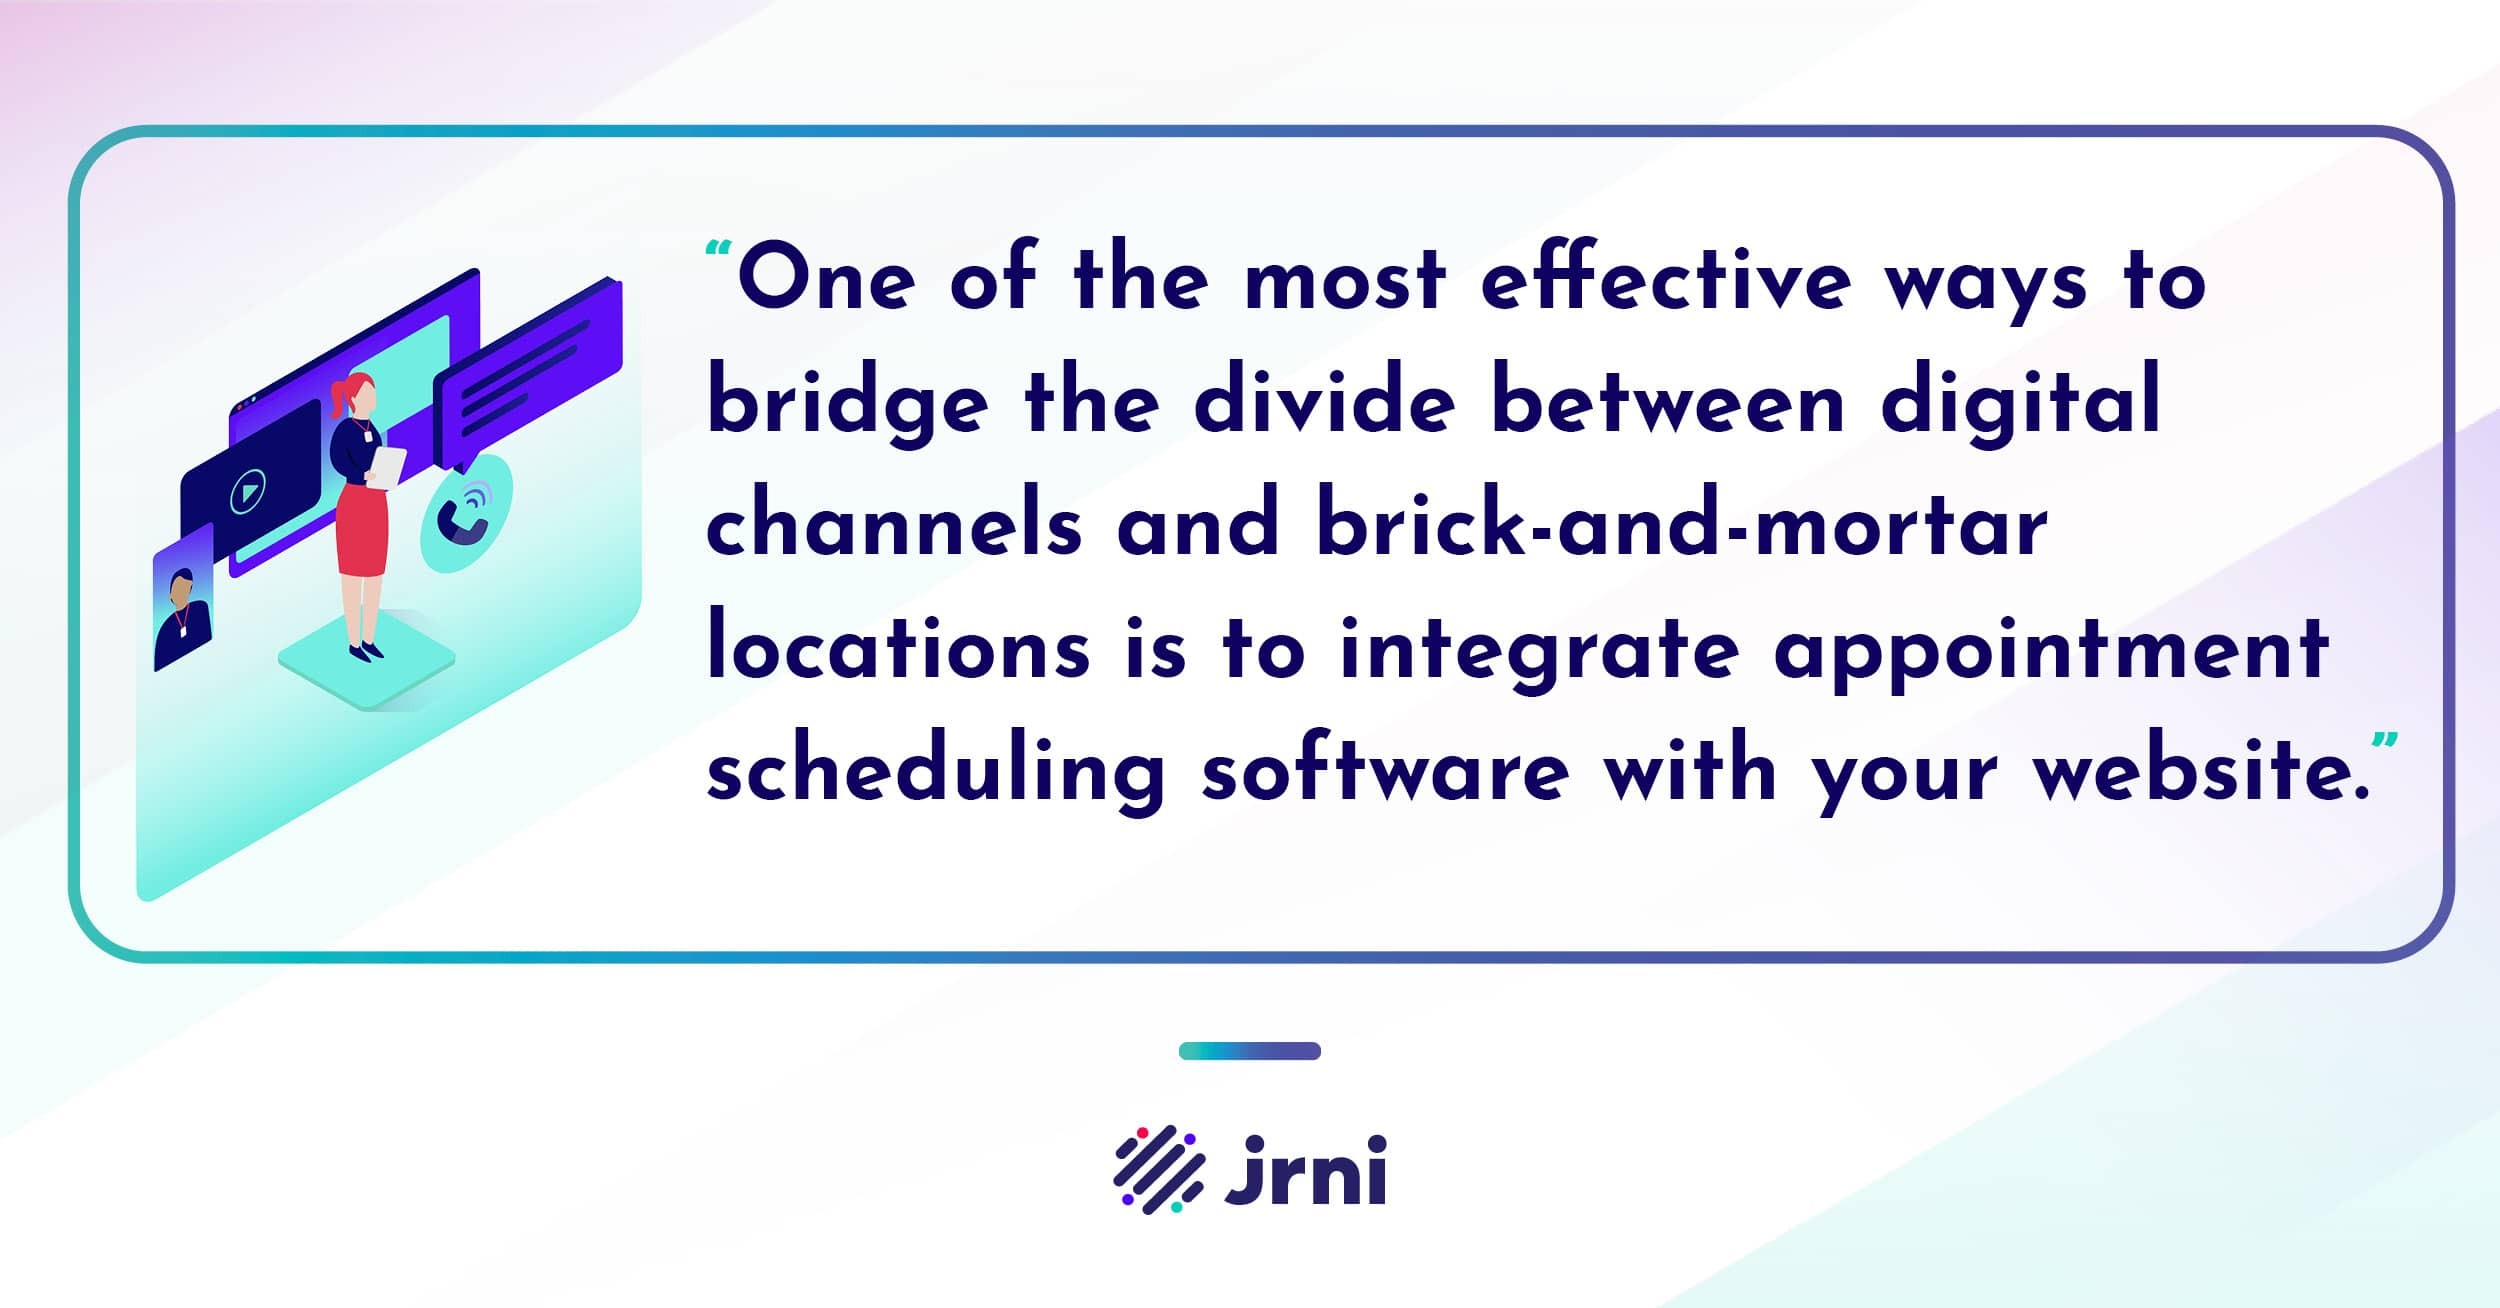 One of the most effective ways to bridge the divide between digital channels and brick-and-mortar locations is to integrate appointment scheduling software with your website.